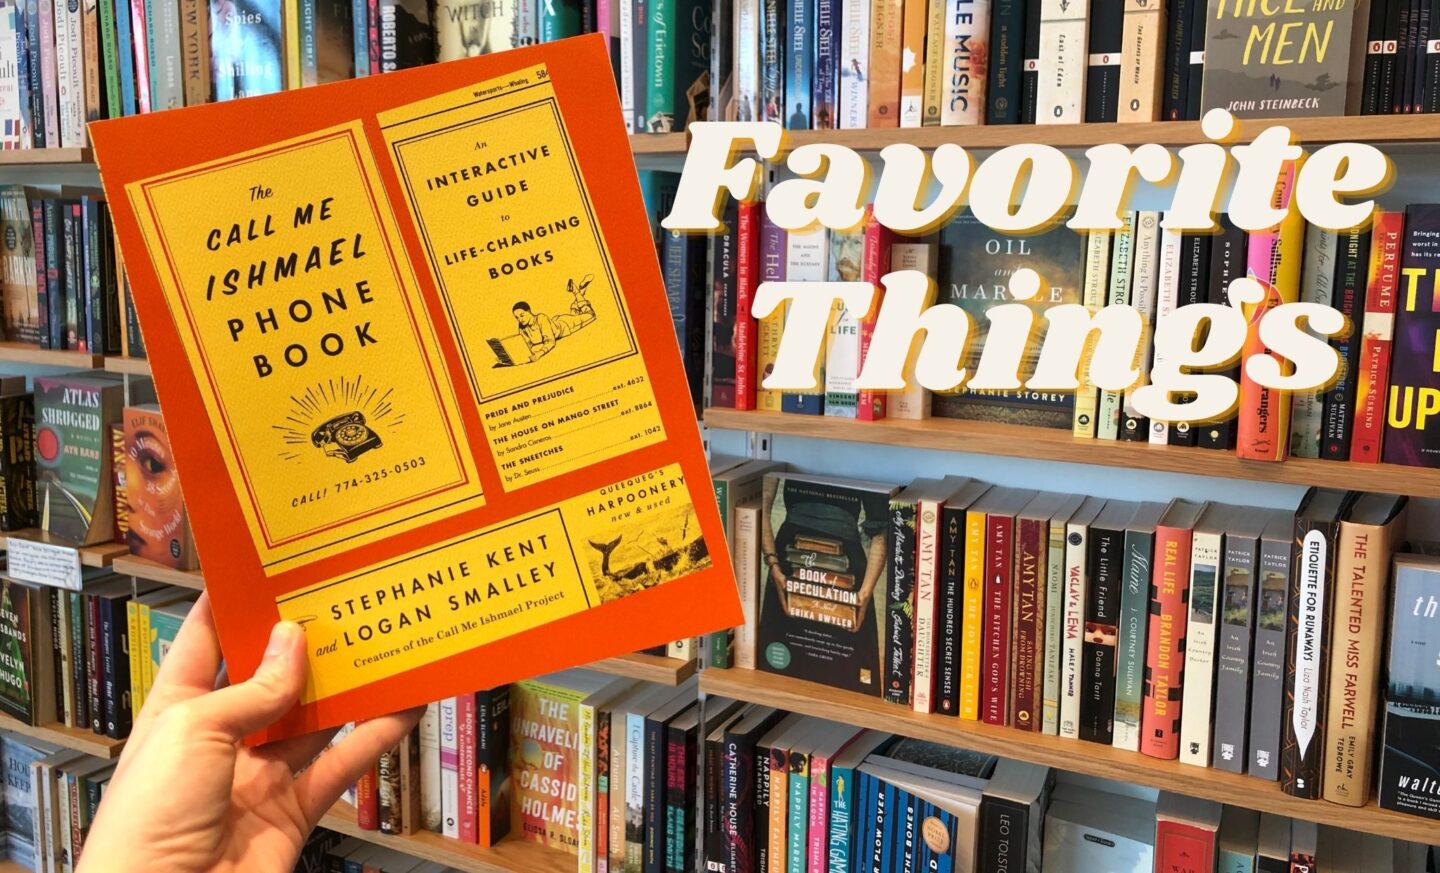 Favorite things books about books - just like gilmore girls